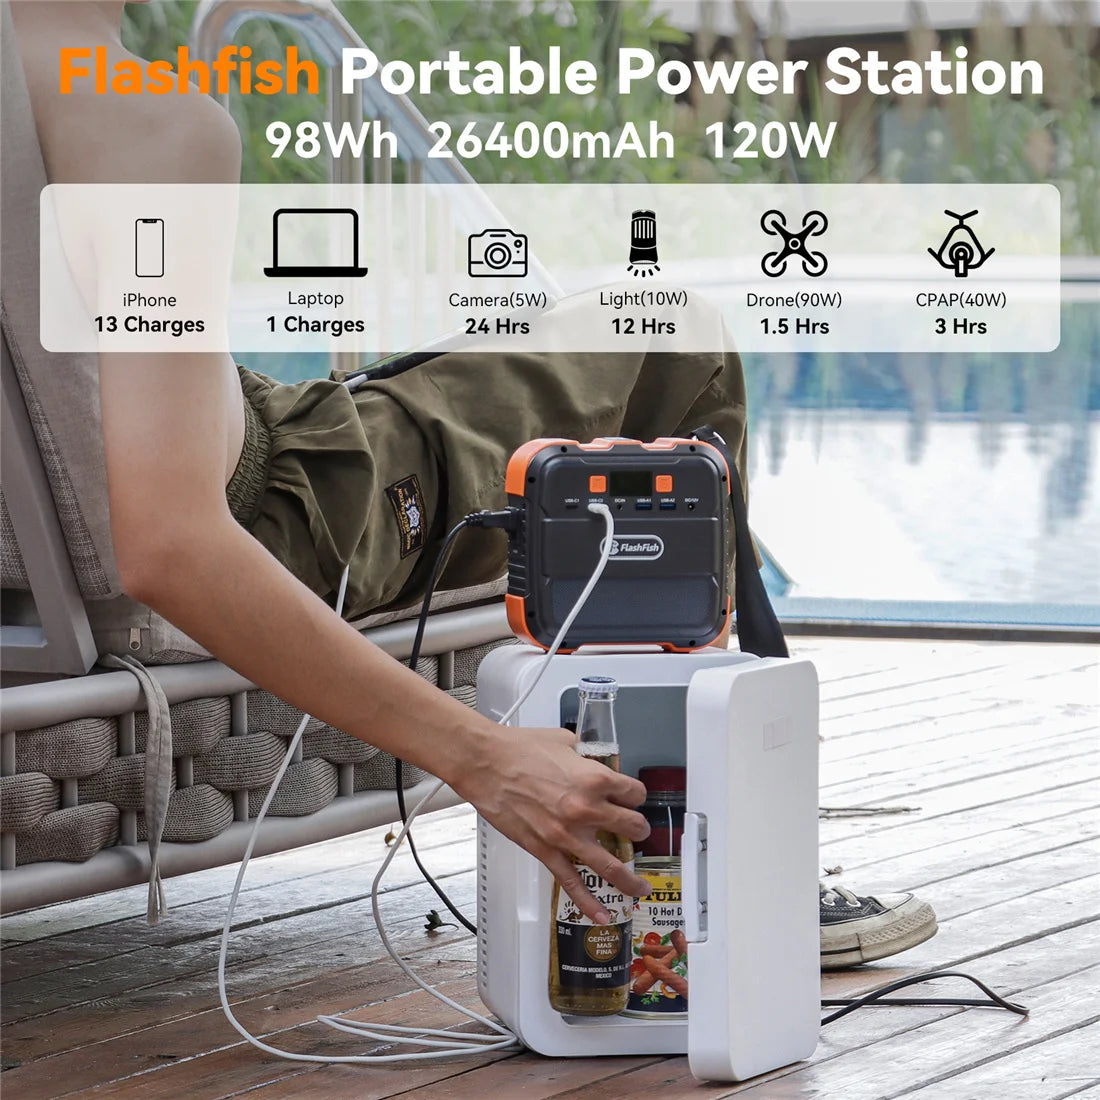 Portable power station for camping, outdoors, and charging small devices.